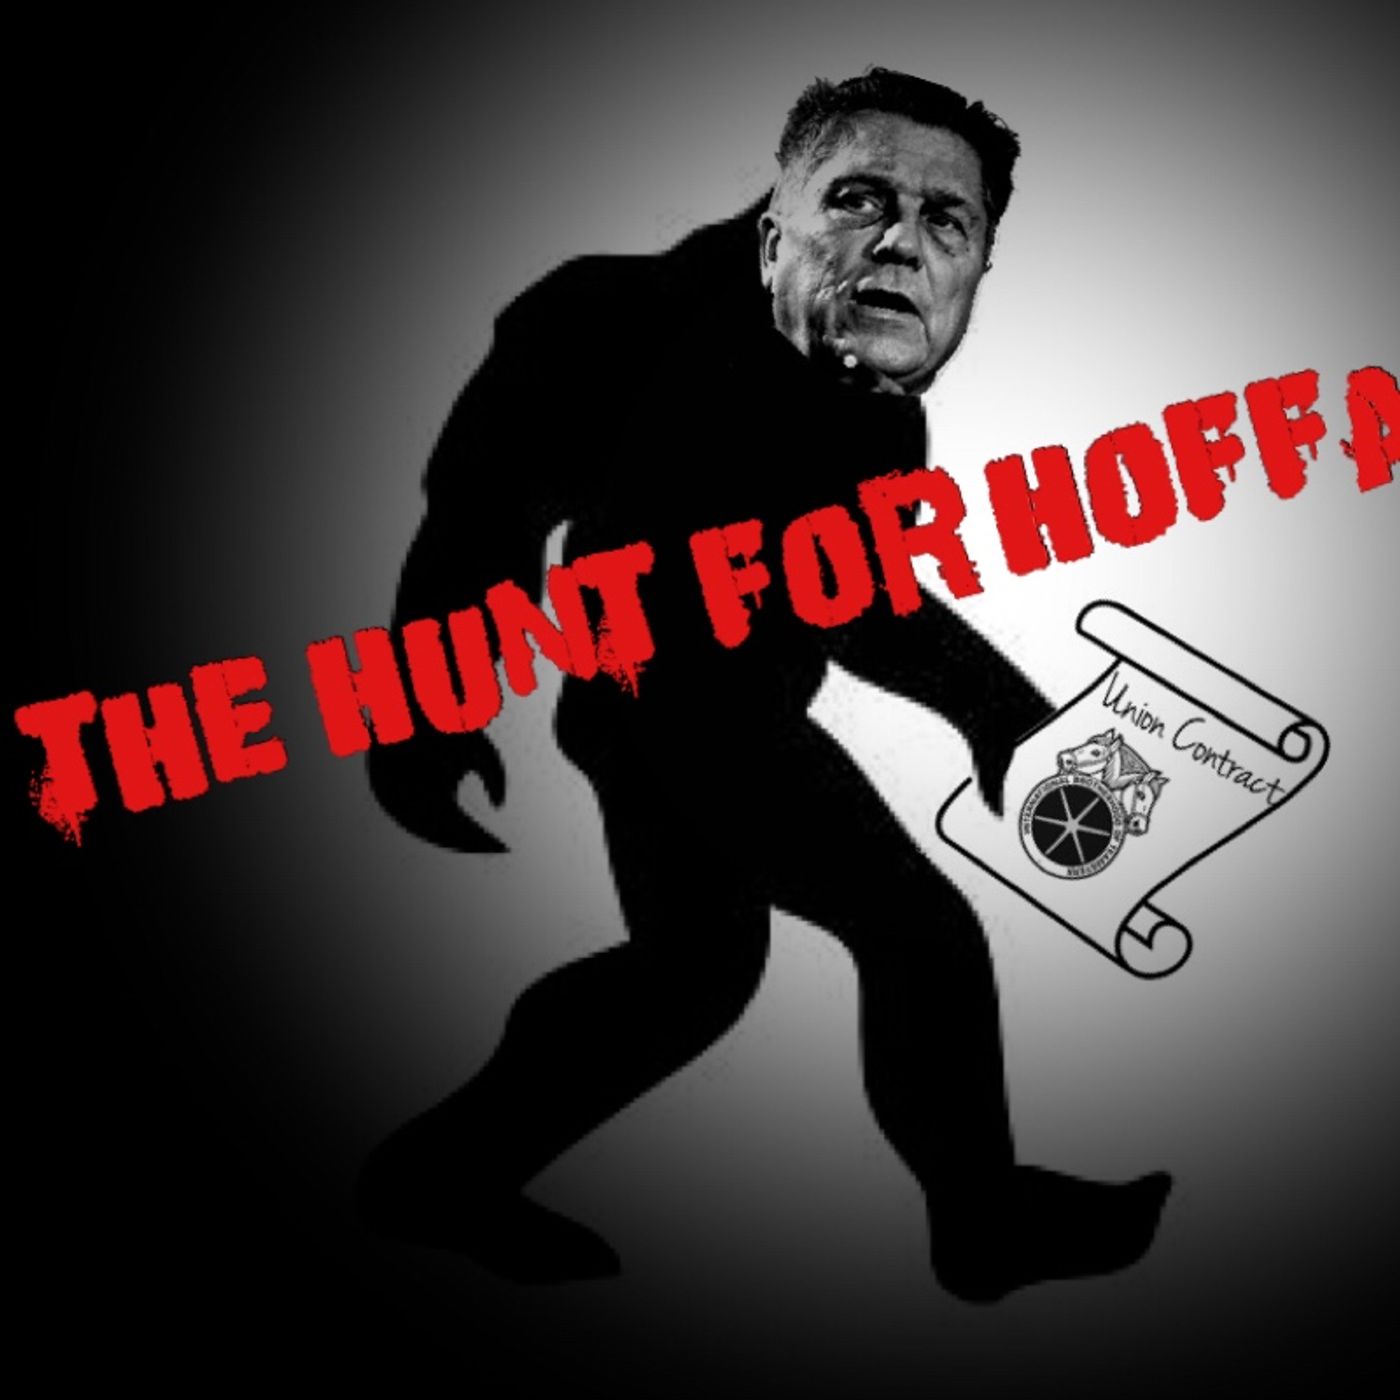 The Hunt for Hoffa